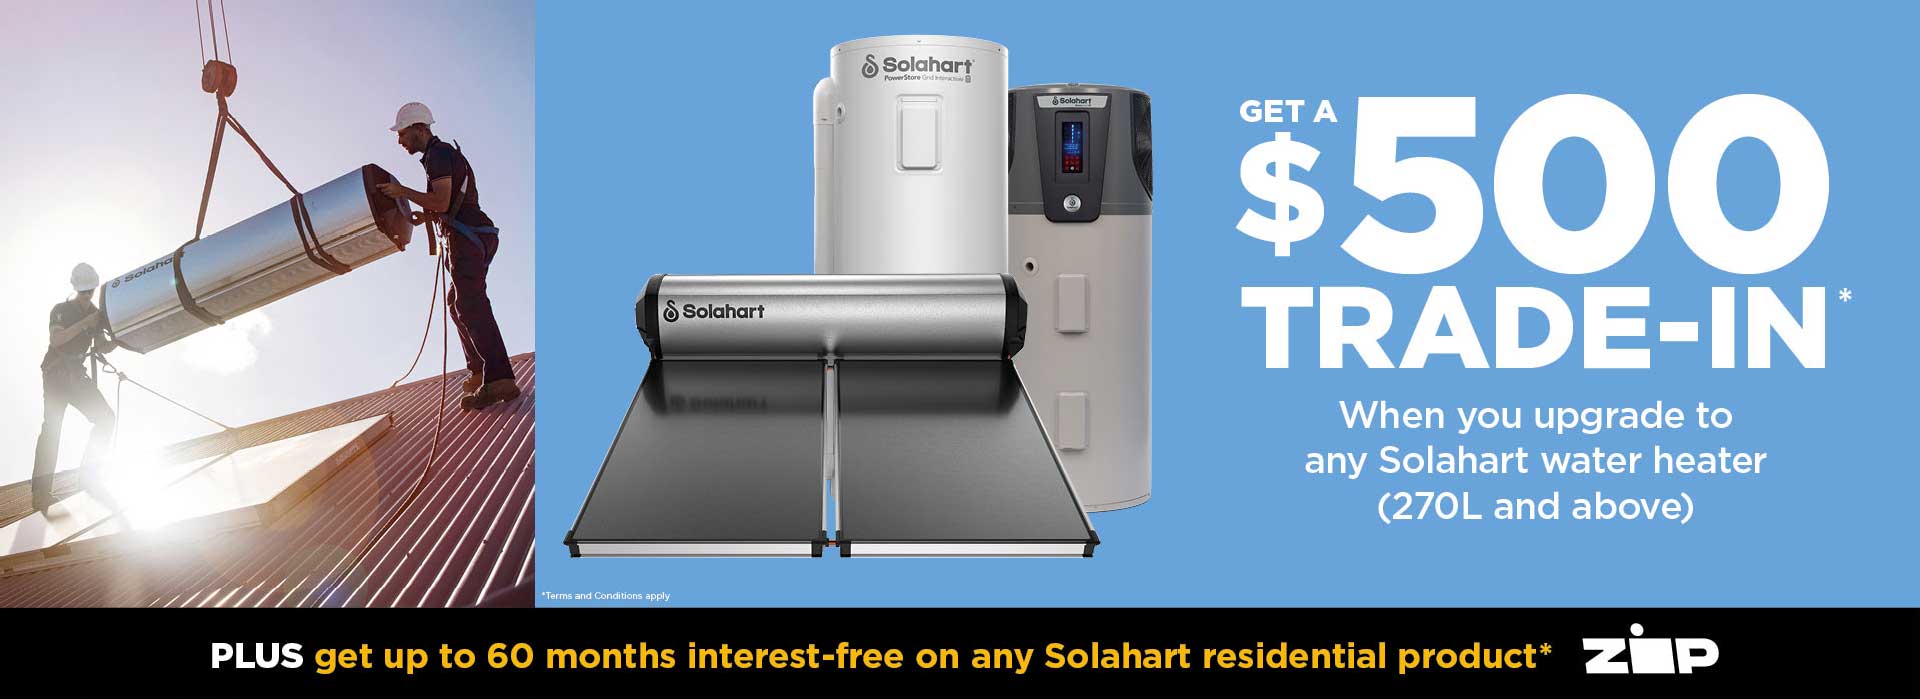 Get a $500 trade-in on Solahart hot water systems